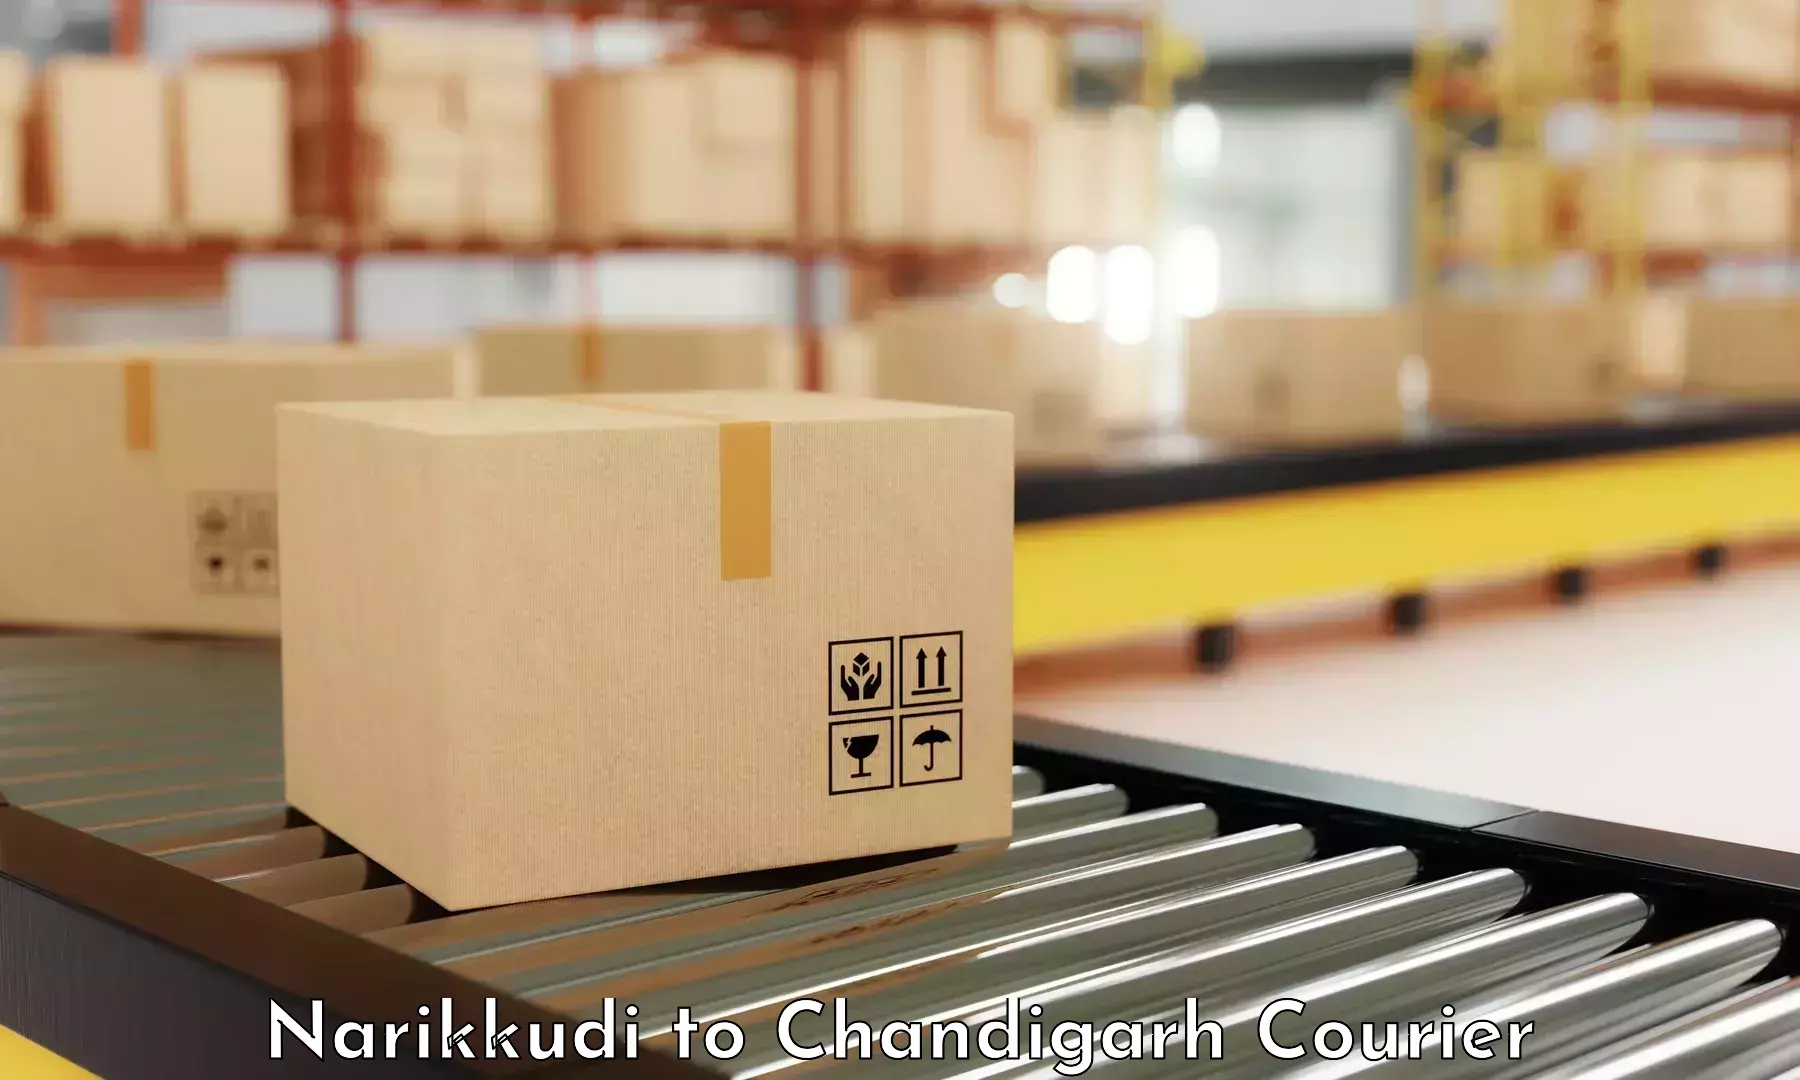 24-hour courier services Narikkudi to Chandigarh